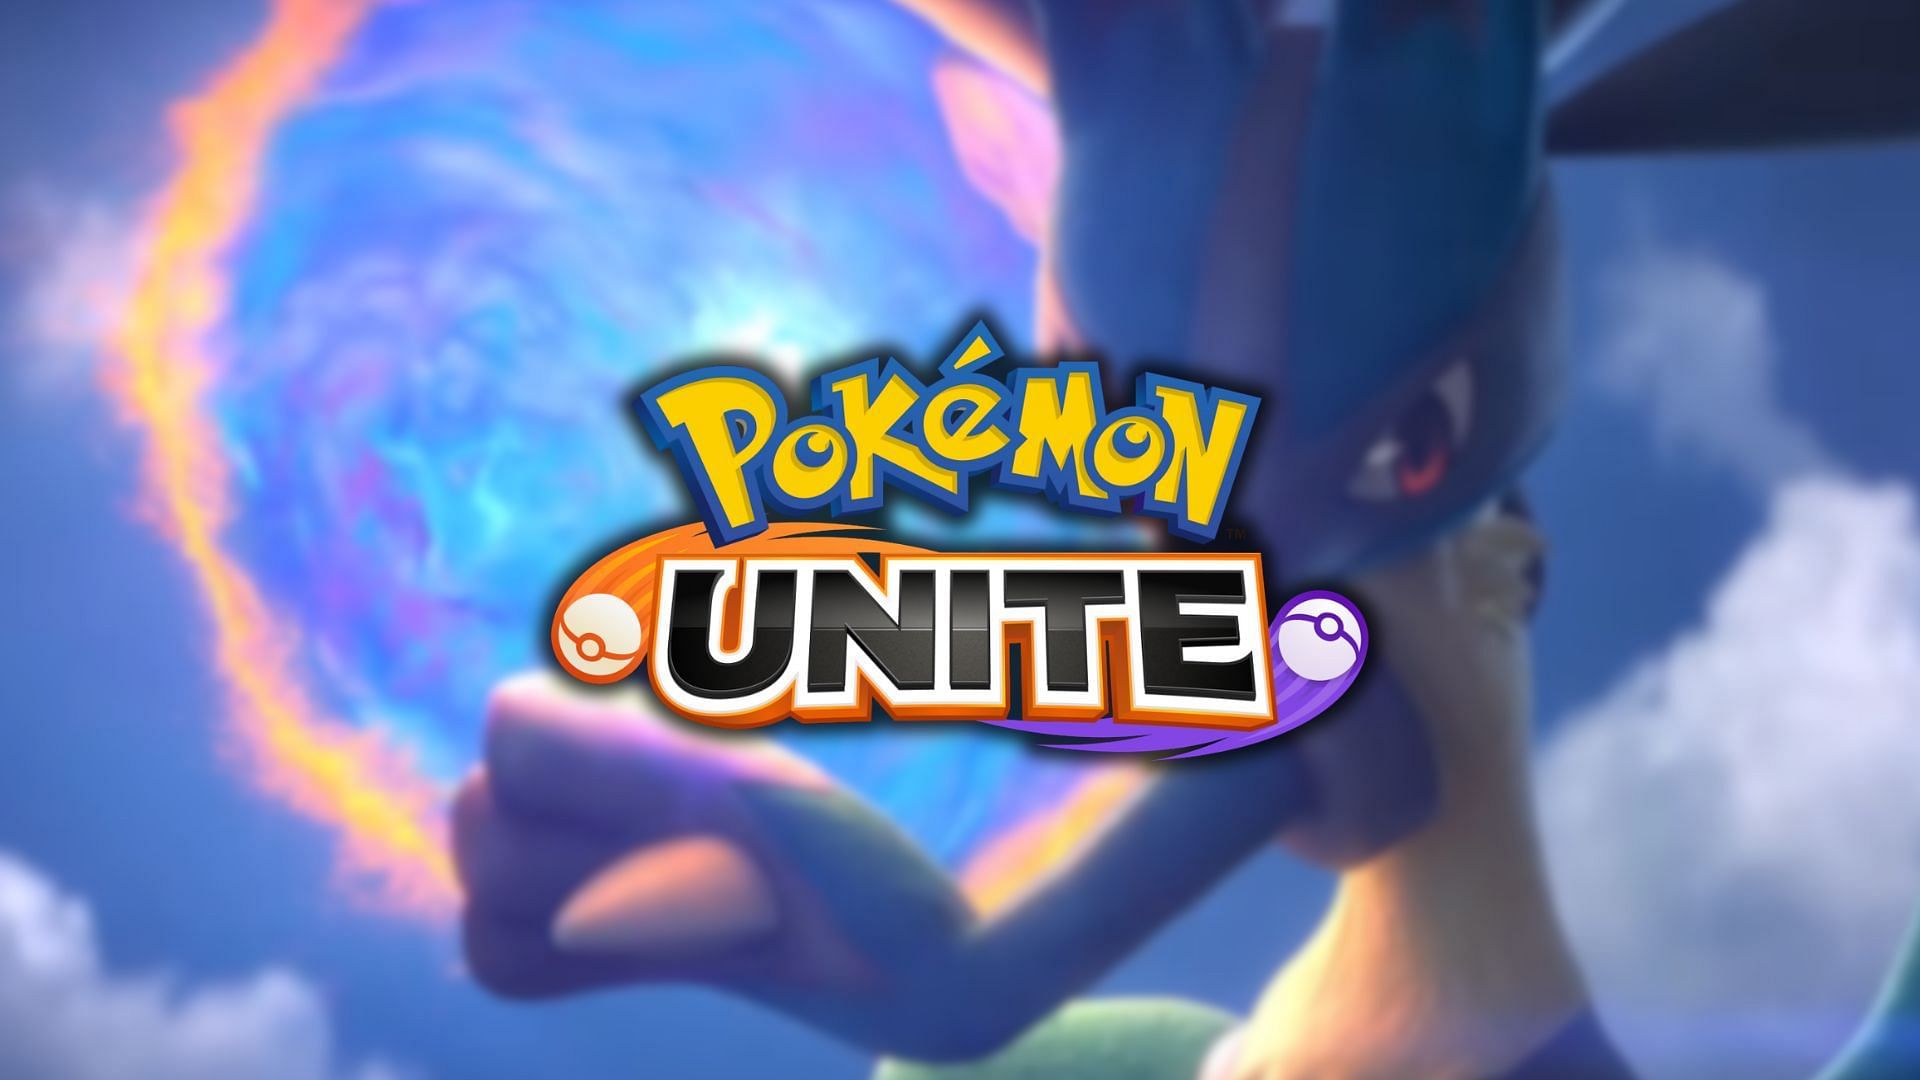 &quot;TiMi never fails to disappoint us&quot;: Pokemon Unite complains about Draft Picks